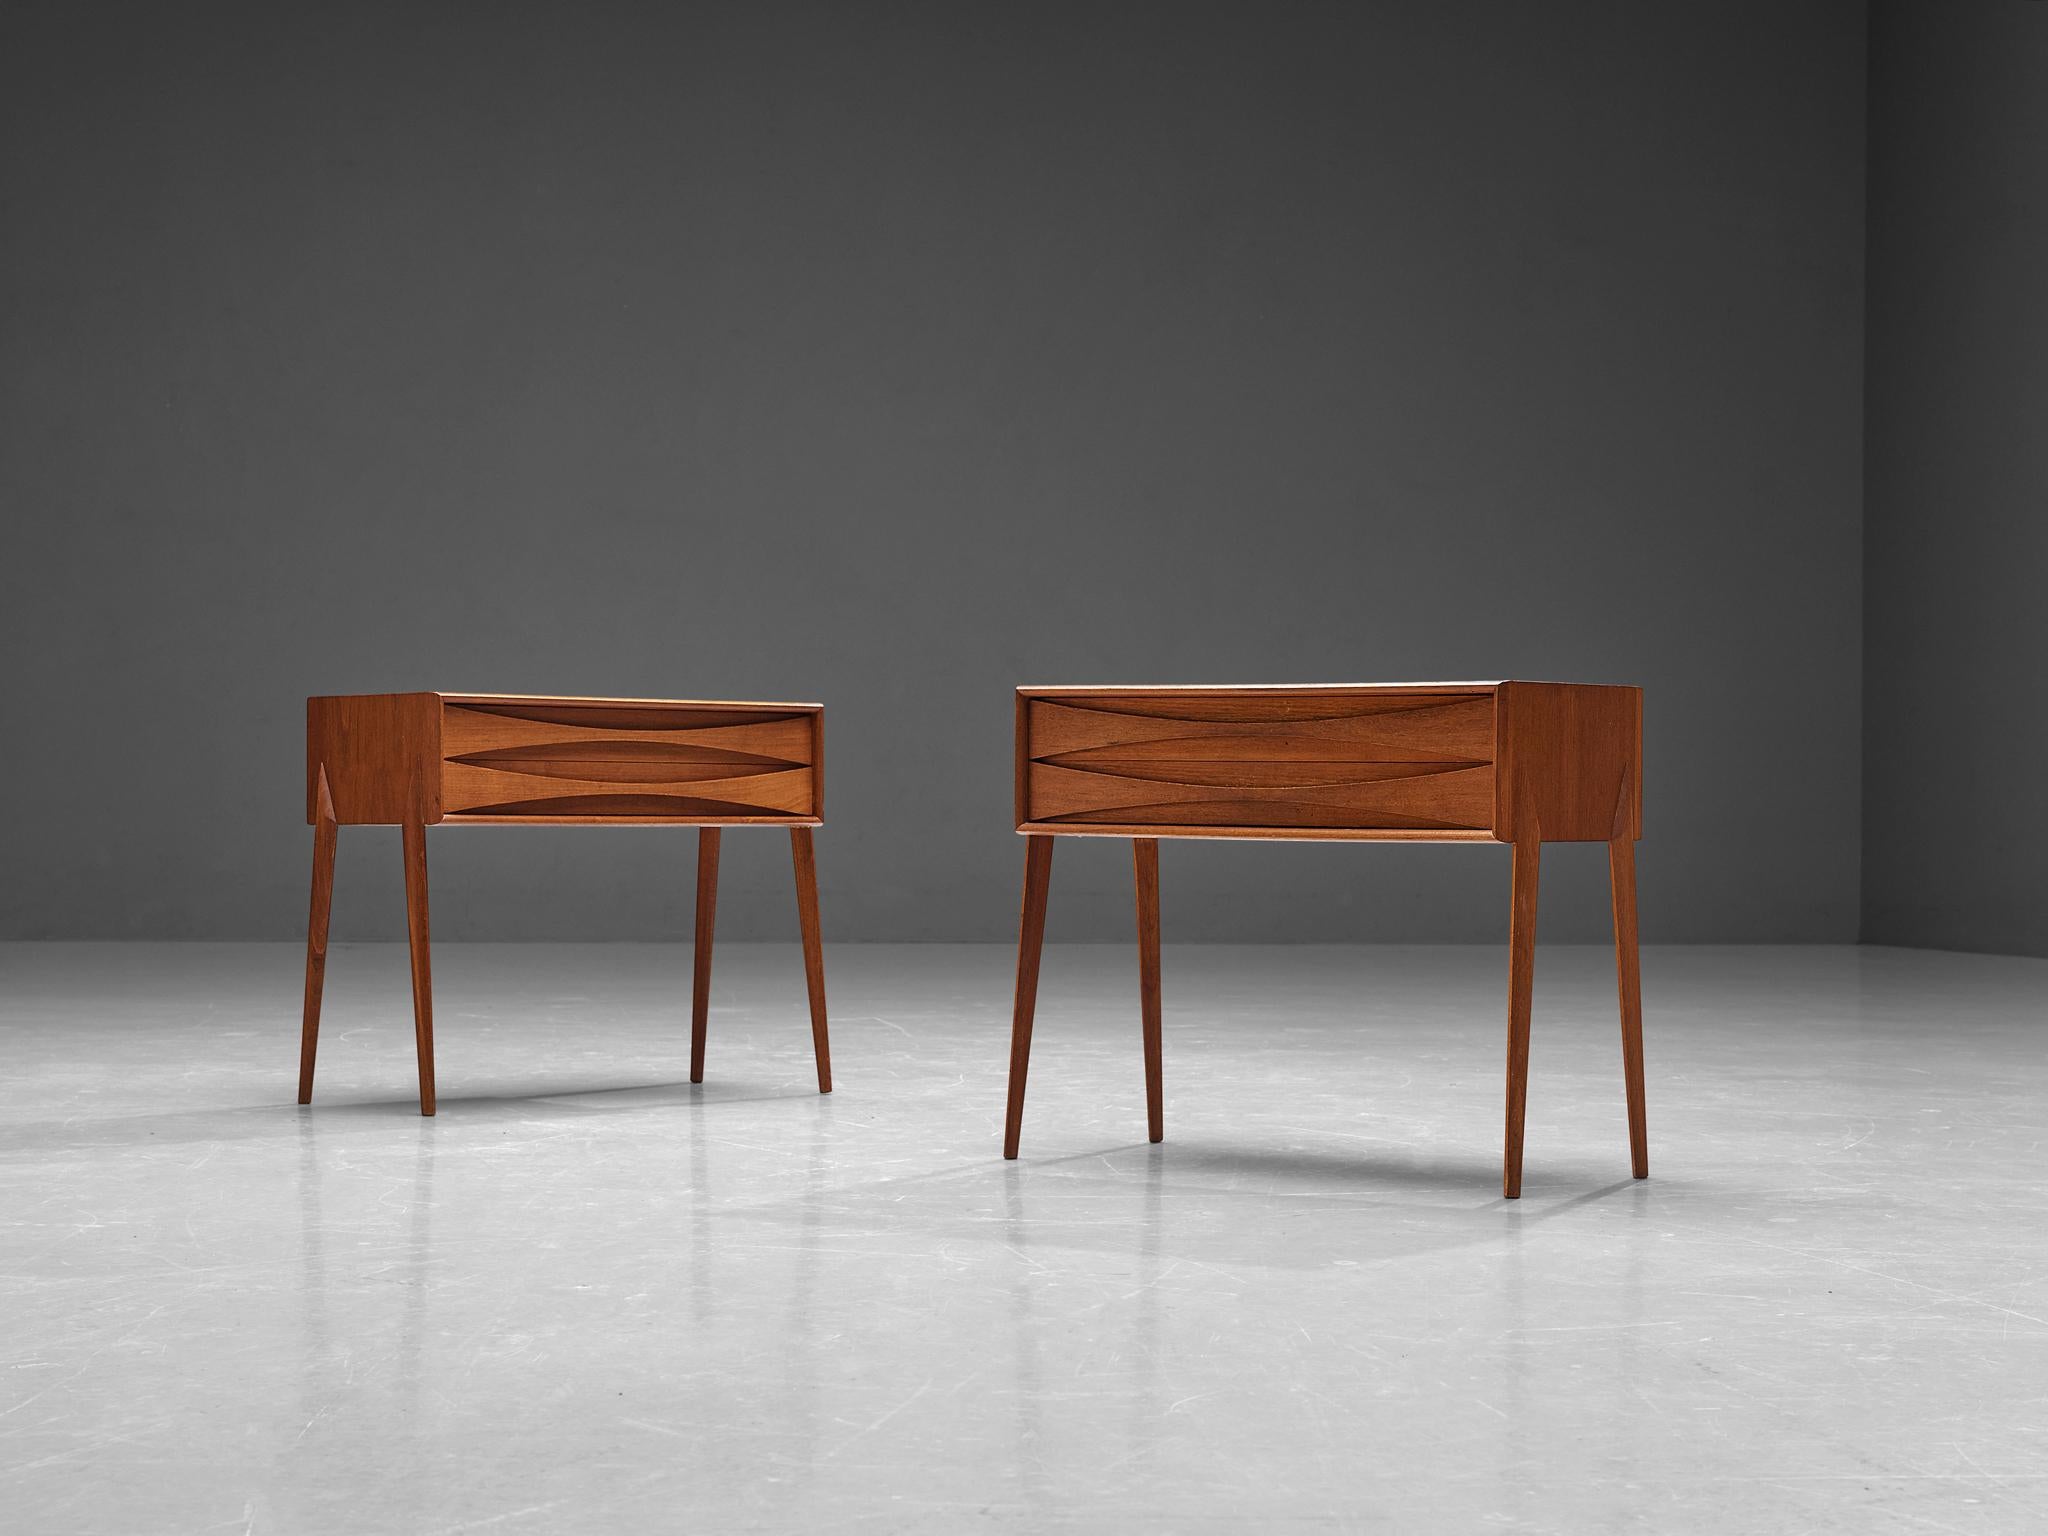 Rimbert Sandholt for Ateljé Glas & Trä, pair of night stands or side tables teak, Sweden, 1960s.

This charming pair of nightstands or side tables is designed by the Swedish designer Rimbert Sandholt. This pair is well-constructed in a precise